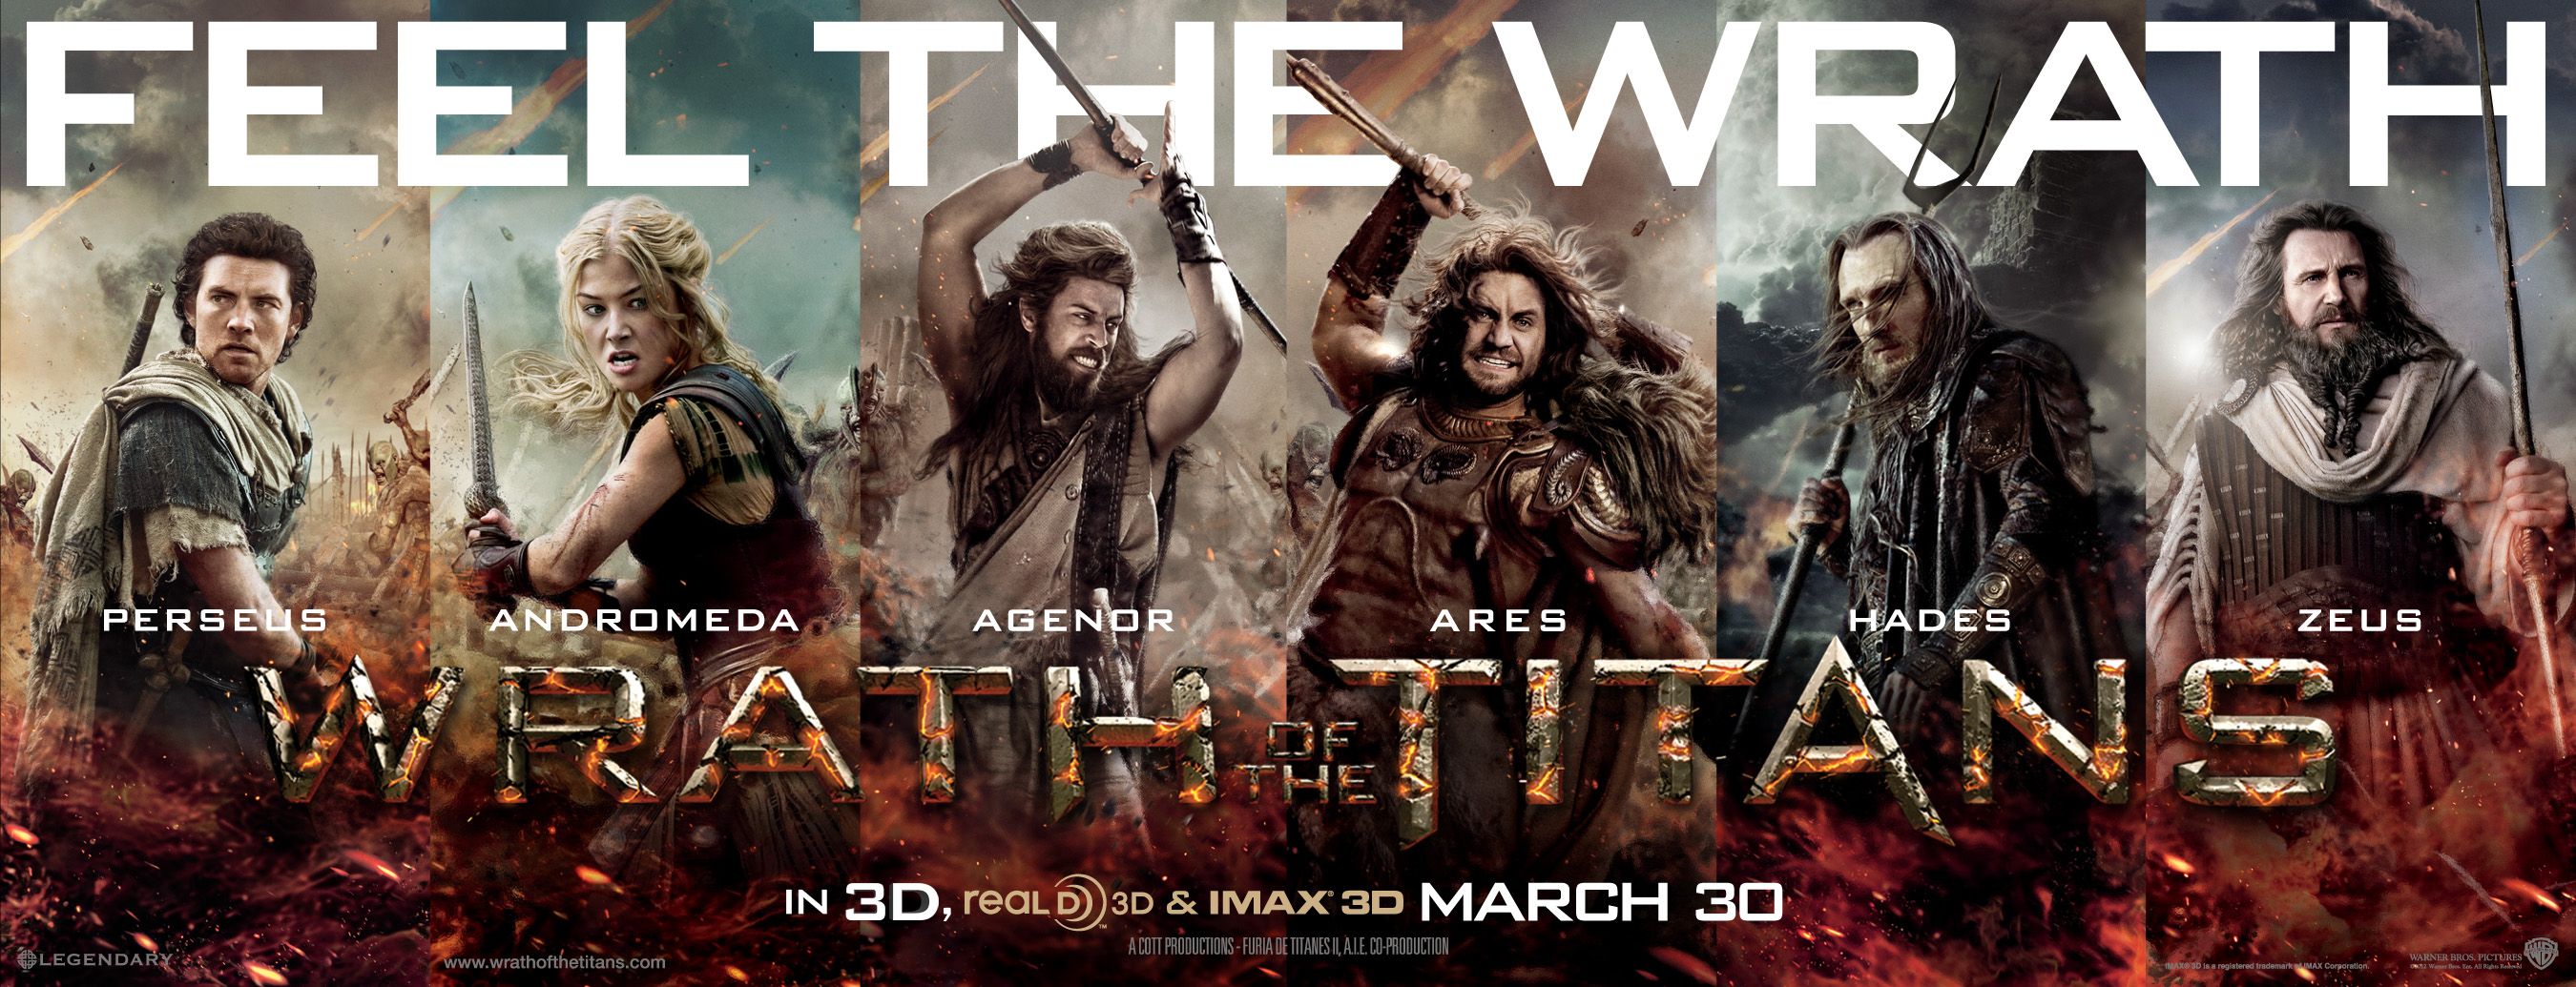 Wrath Of The Titans Poster #2